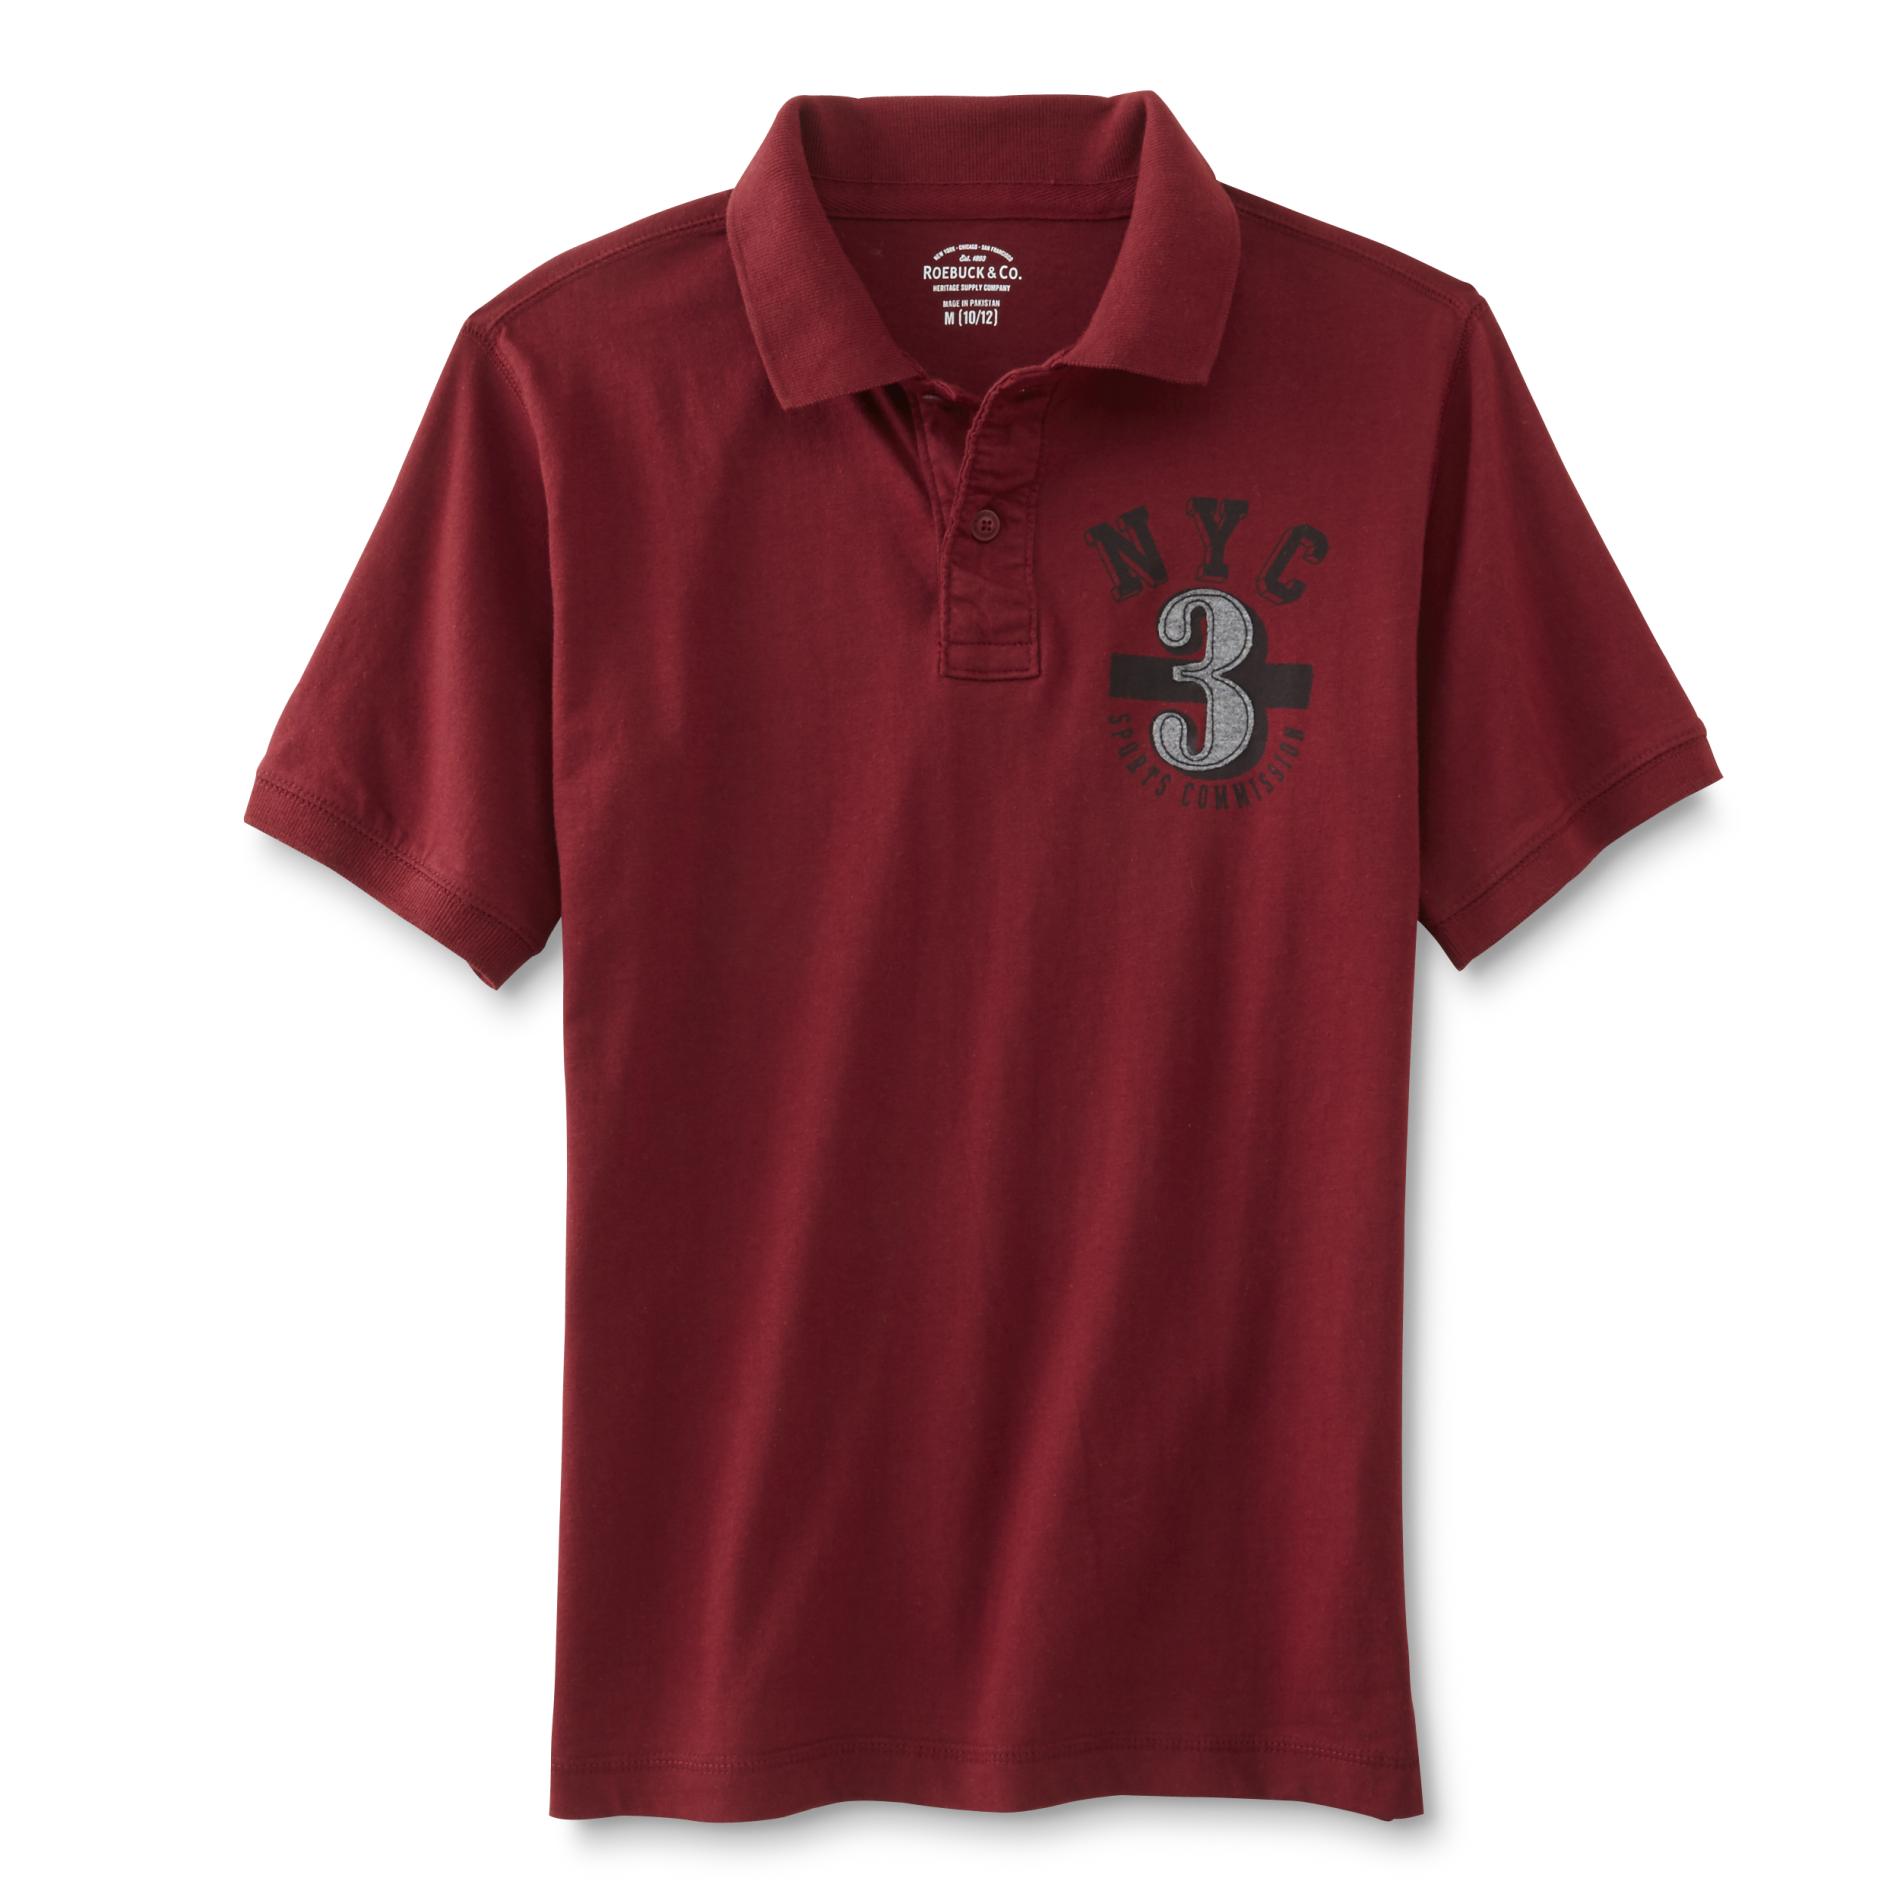 Roebuck & Co. Boy's Graphic Polo Shirt - NYC Sports Commission